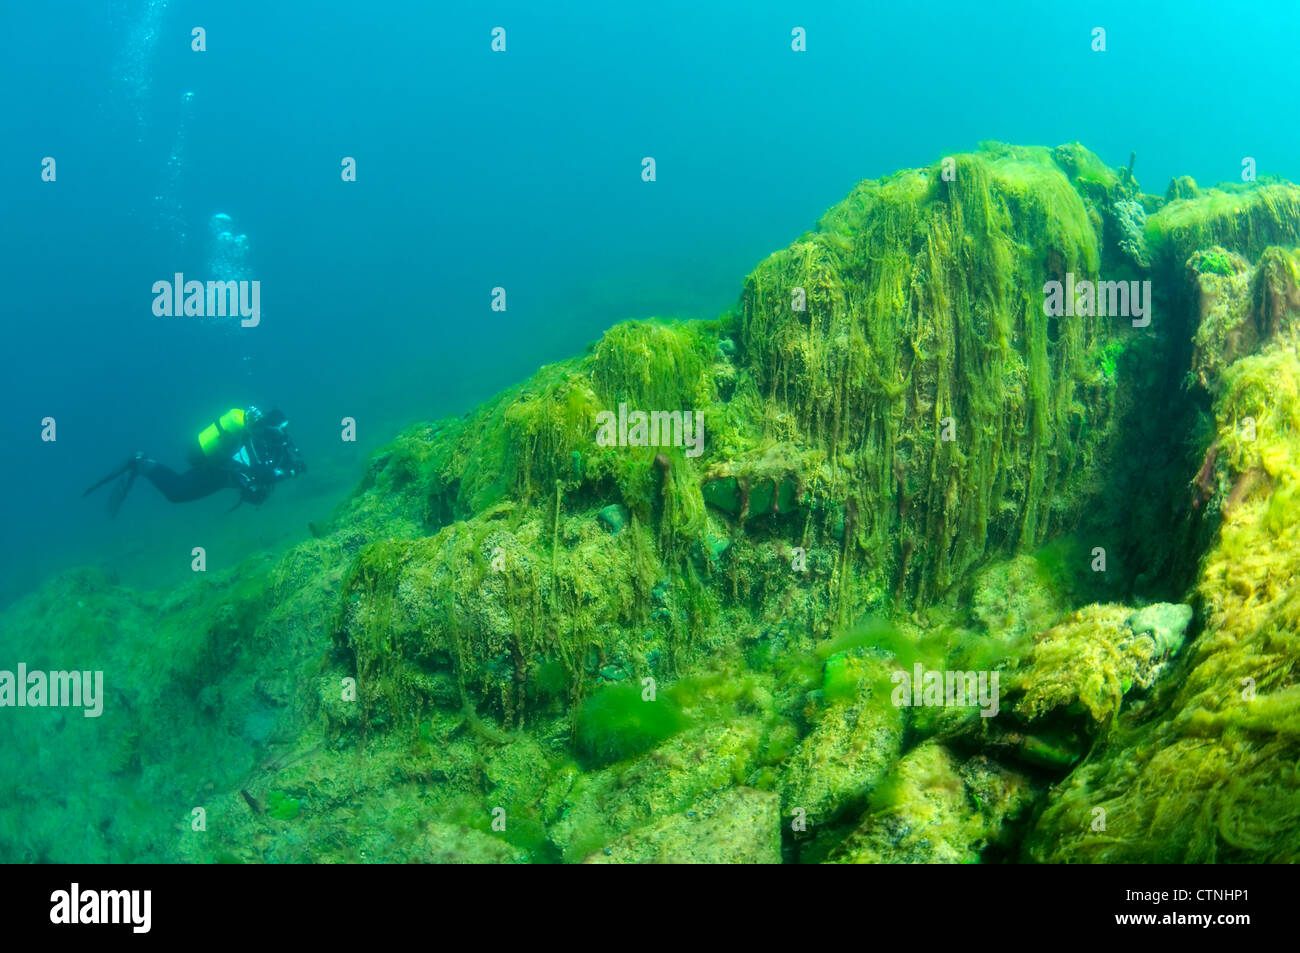 water silk, mermaid's tressses, or blanket weed (Spirogyra) the Ecological catastrophy for Baikal lake Stock Photo